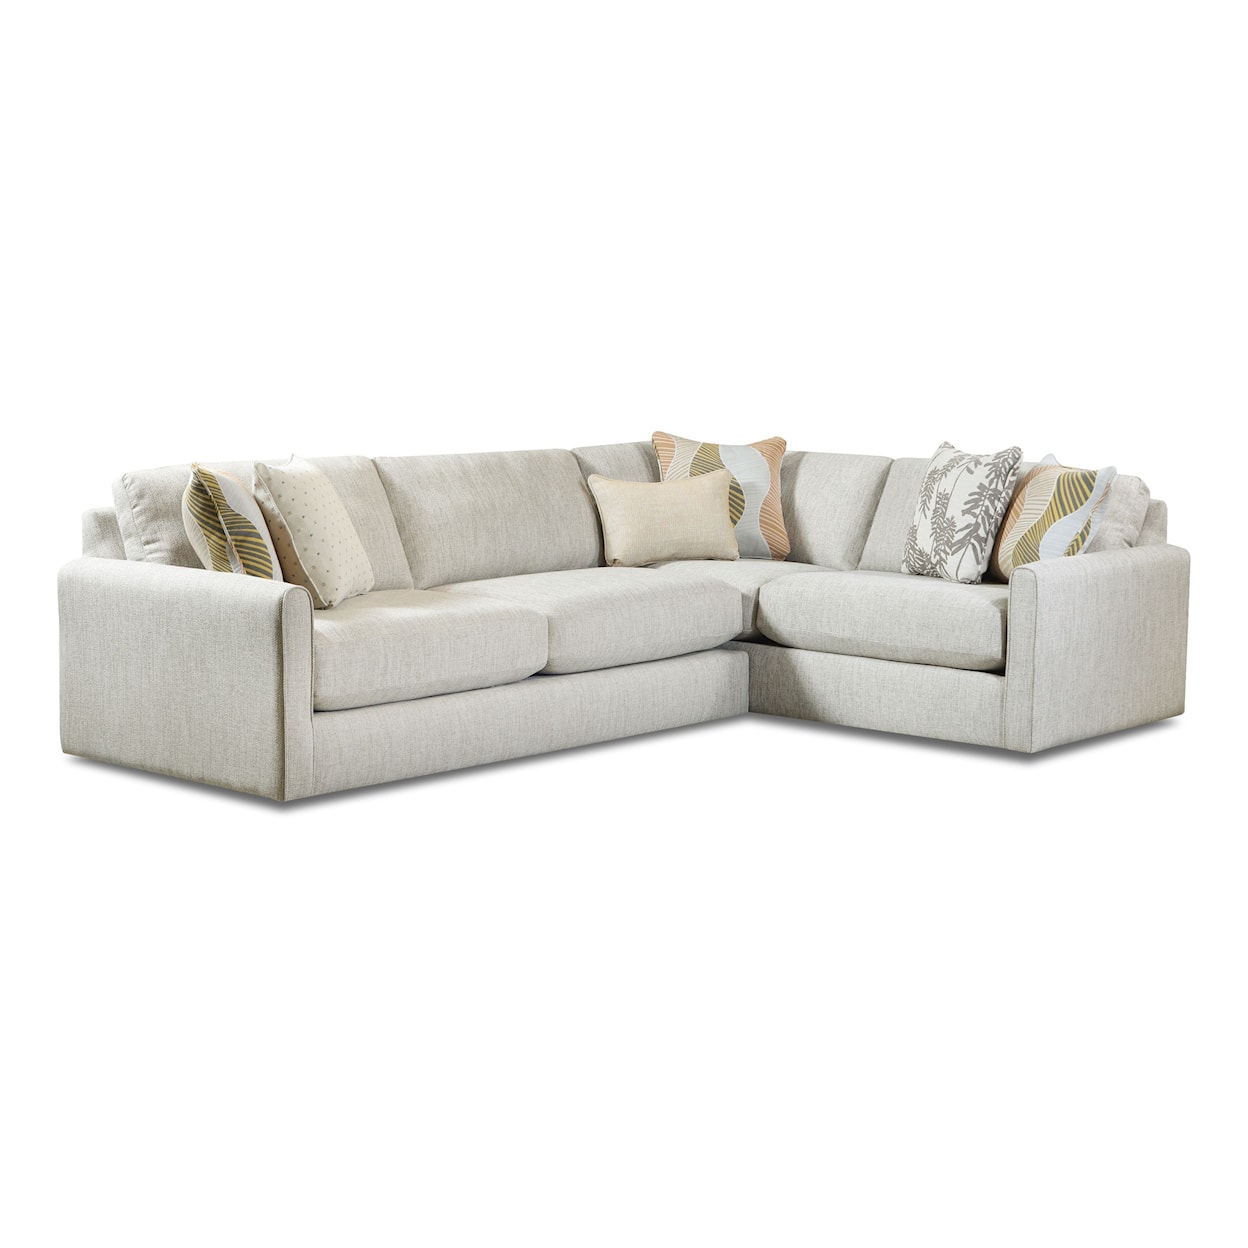 Fusion Furniture 7000 LOXLEY COCONUT 2-Piece Sectional